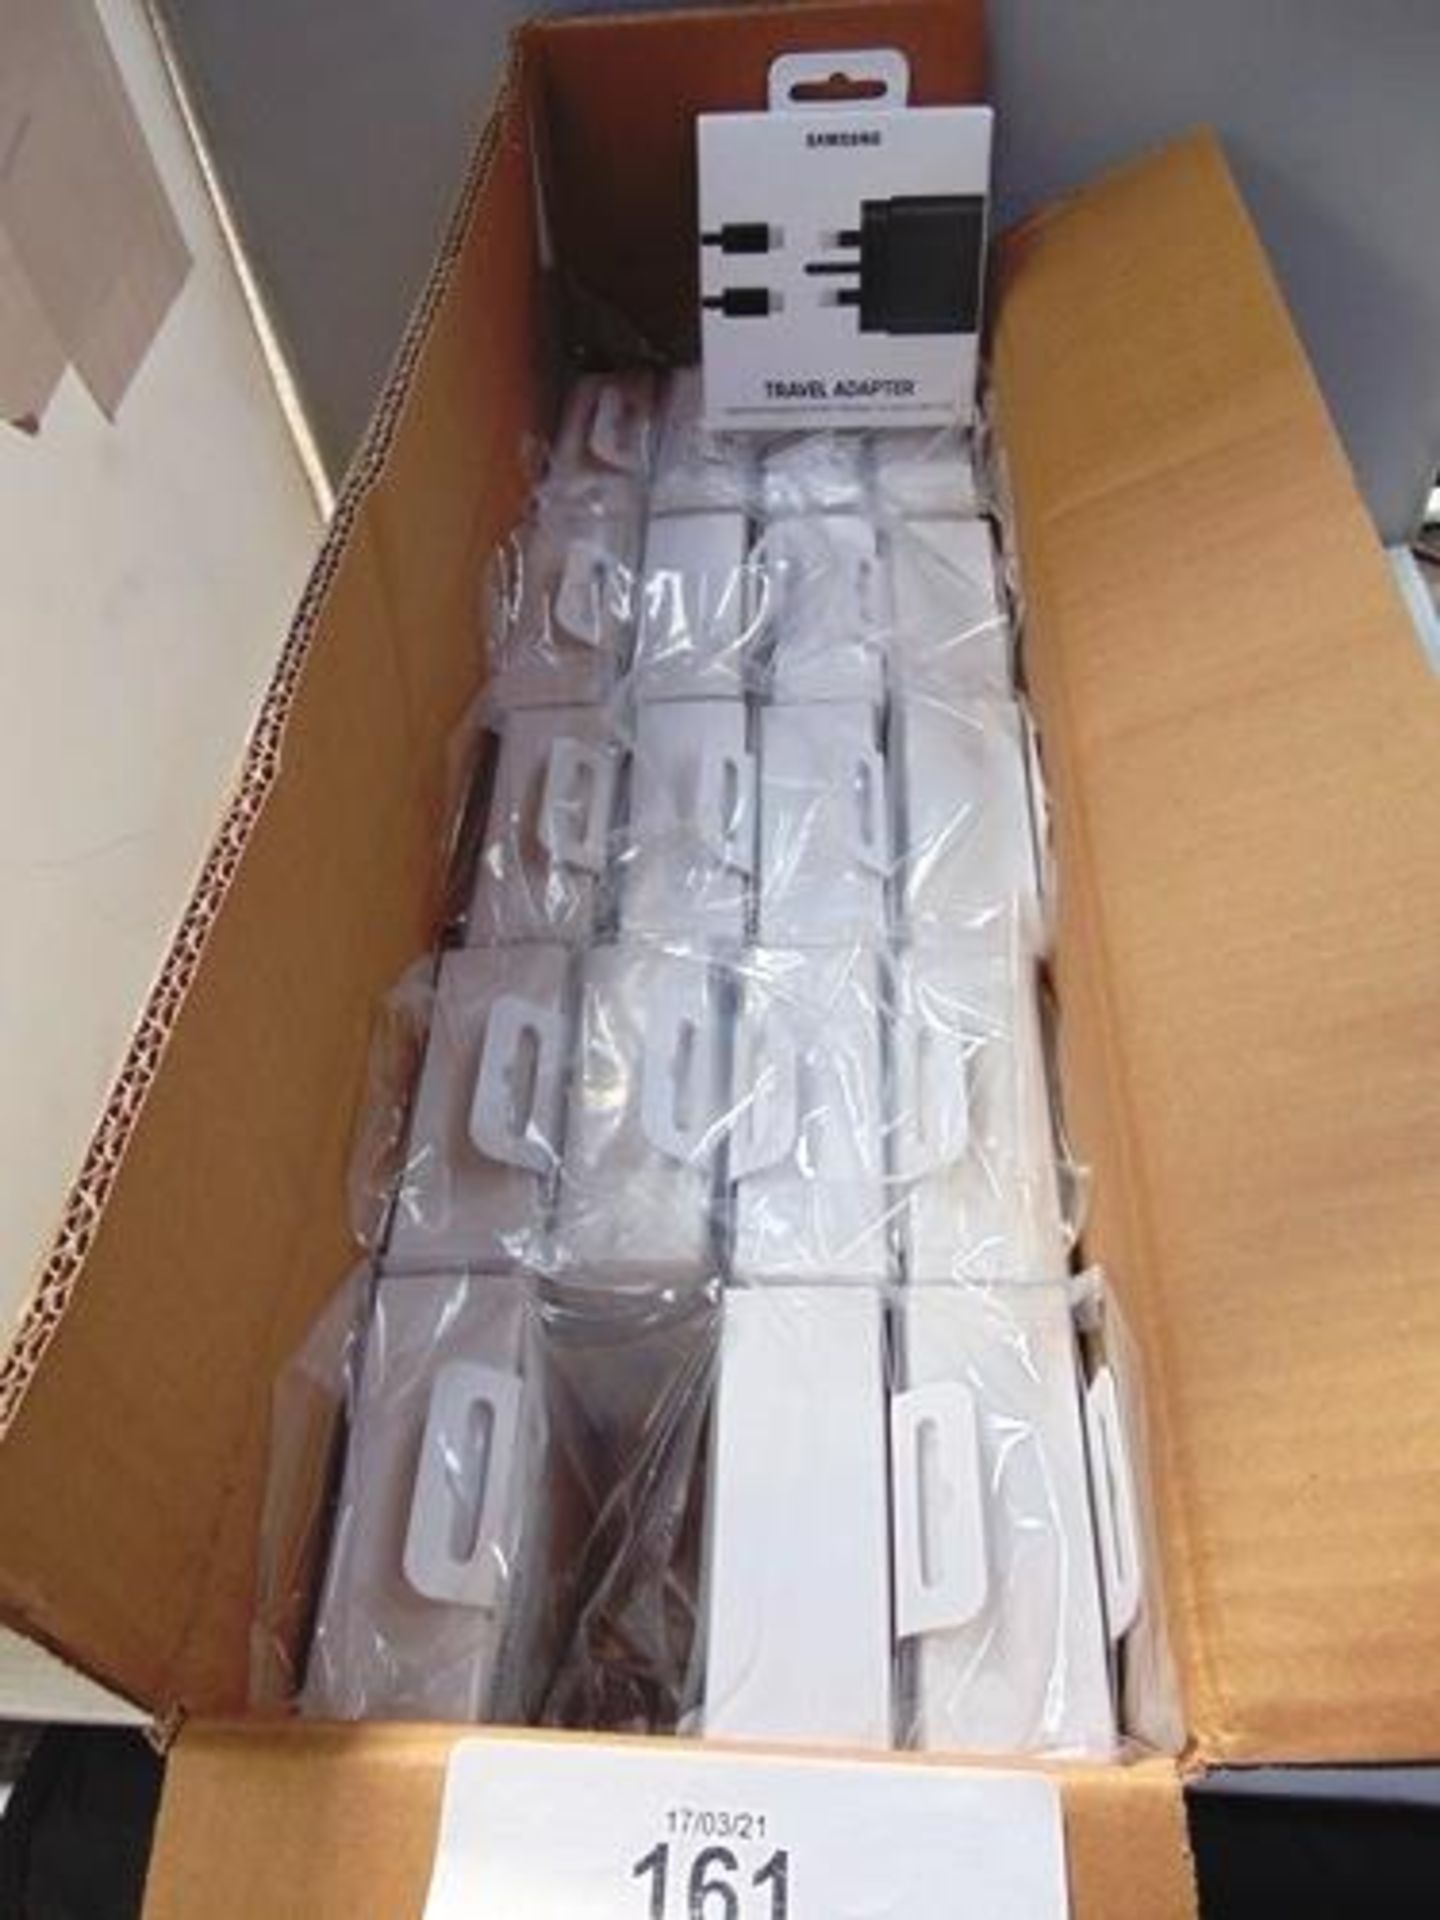 20 x Samsung travel adapters, model EP-TA845XBEGGB, 45W, 5A - Sealed new in box (C1D) - Image 2 of 3